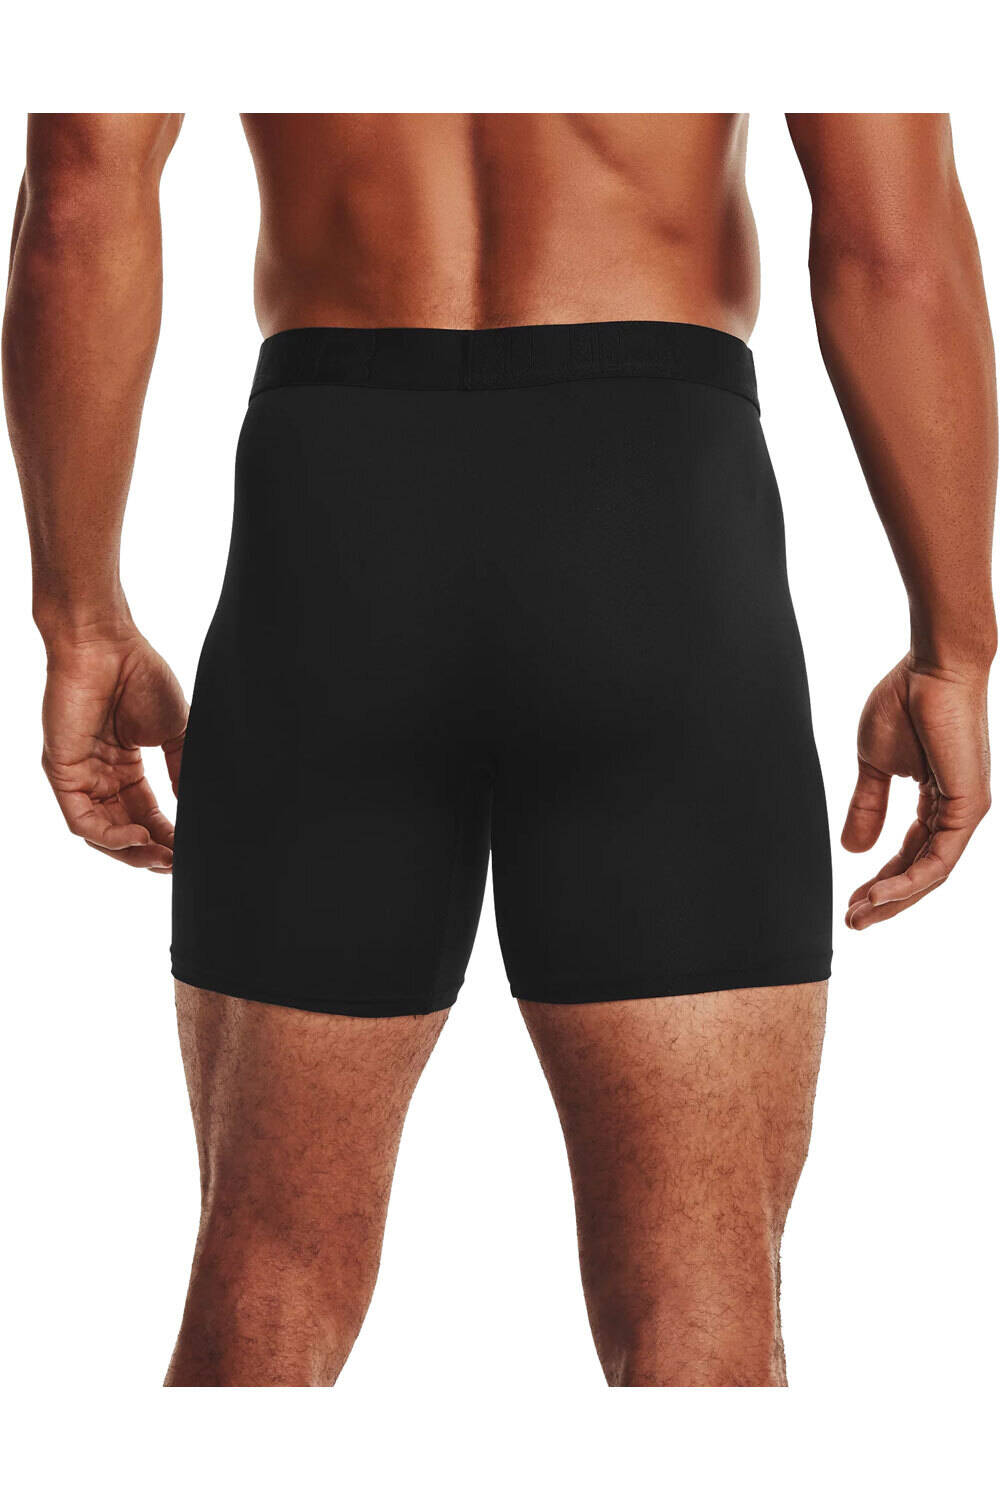 Under Armour boxer UA Tech Mesh 6in 2 Pack vista trasera